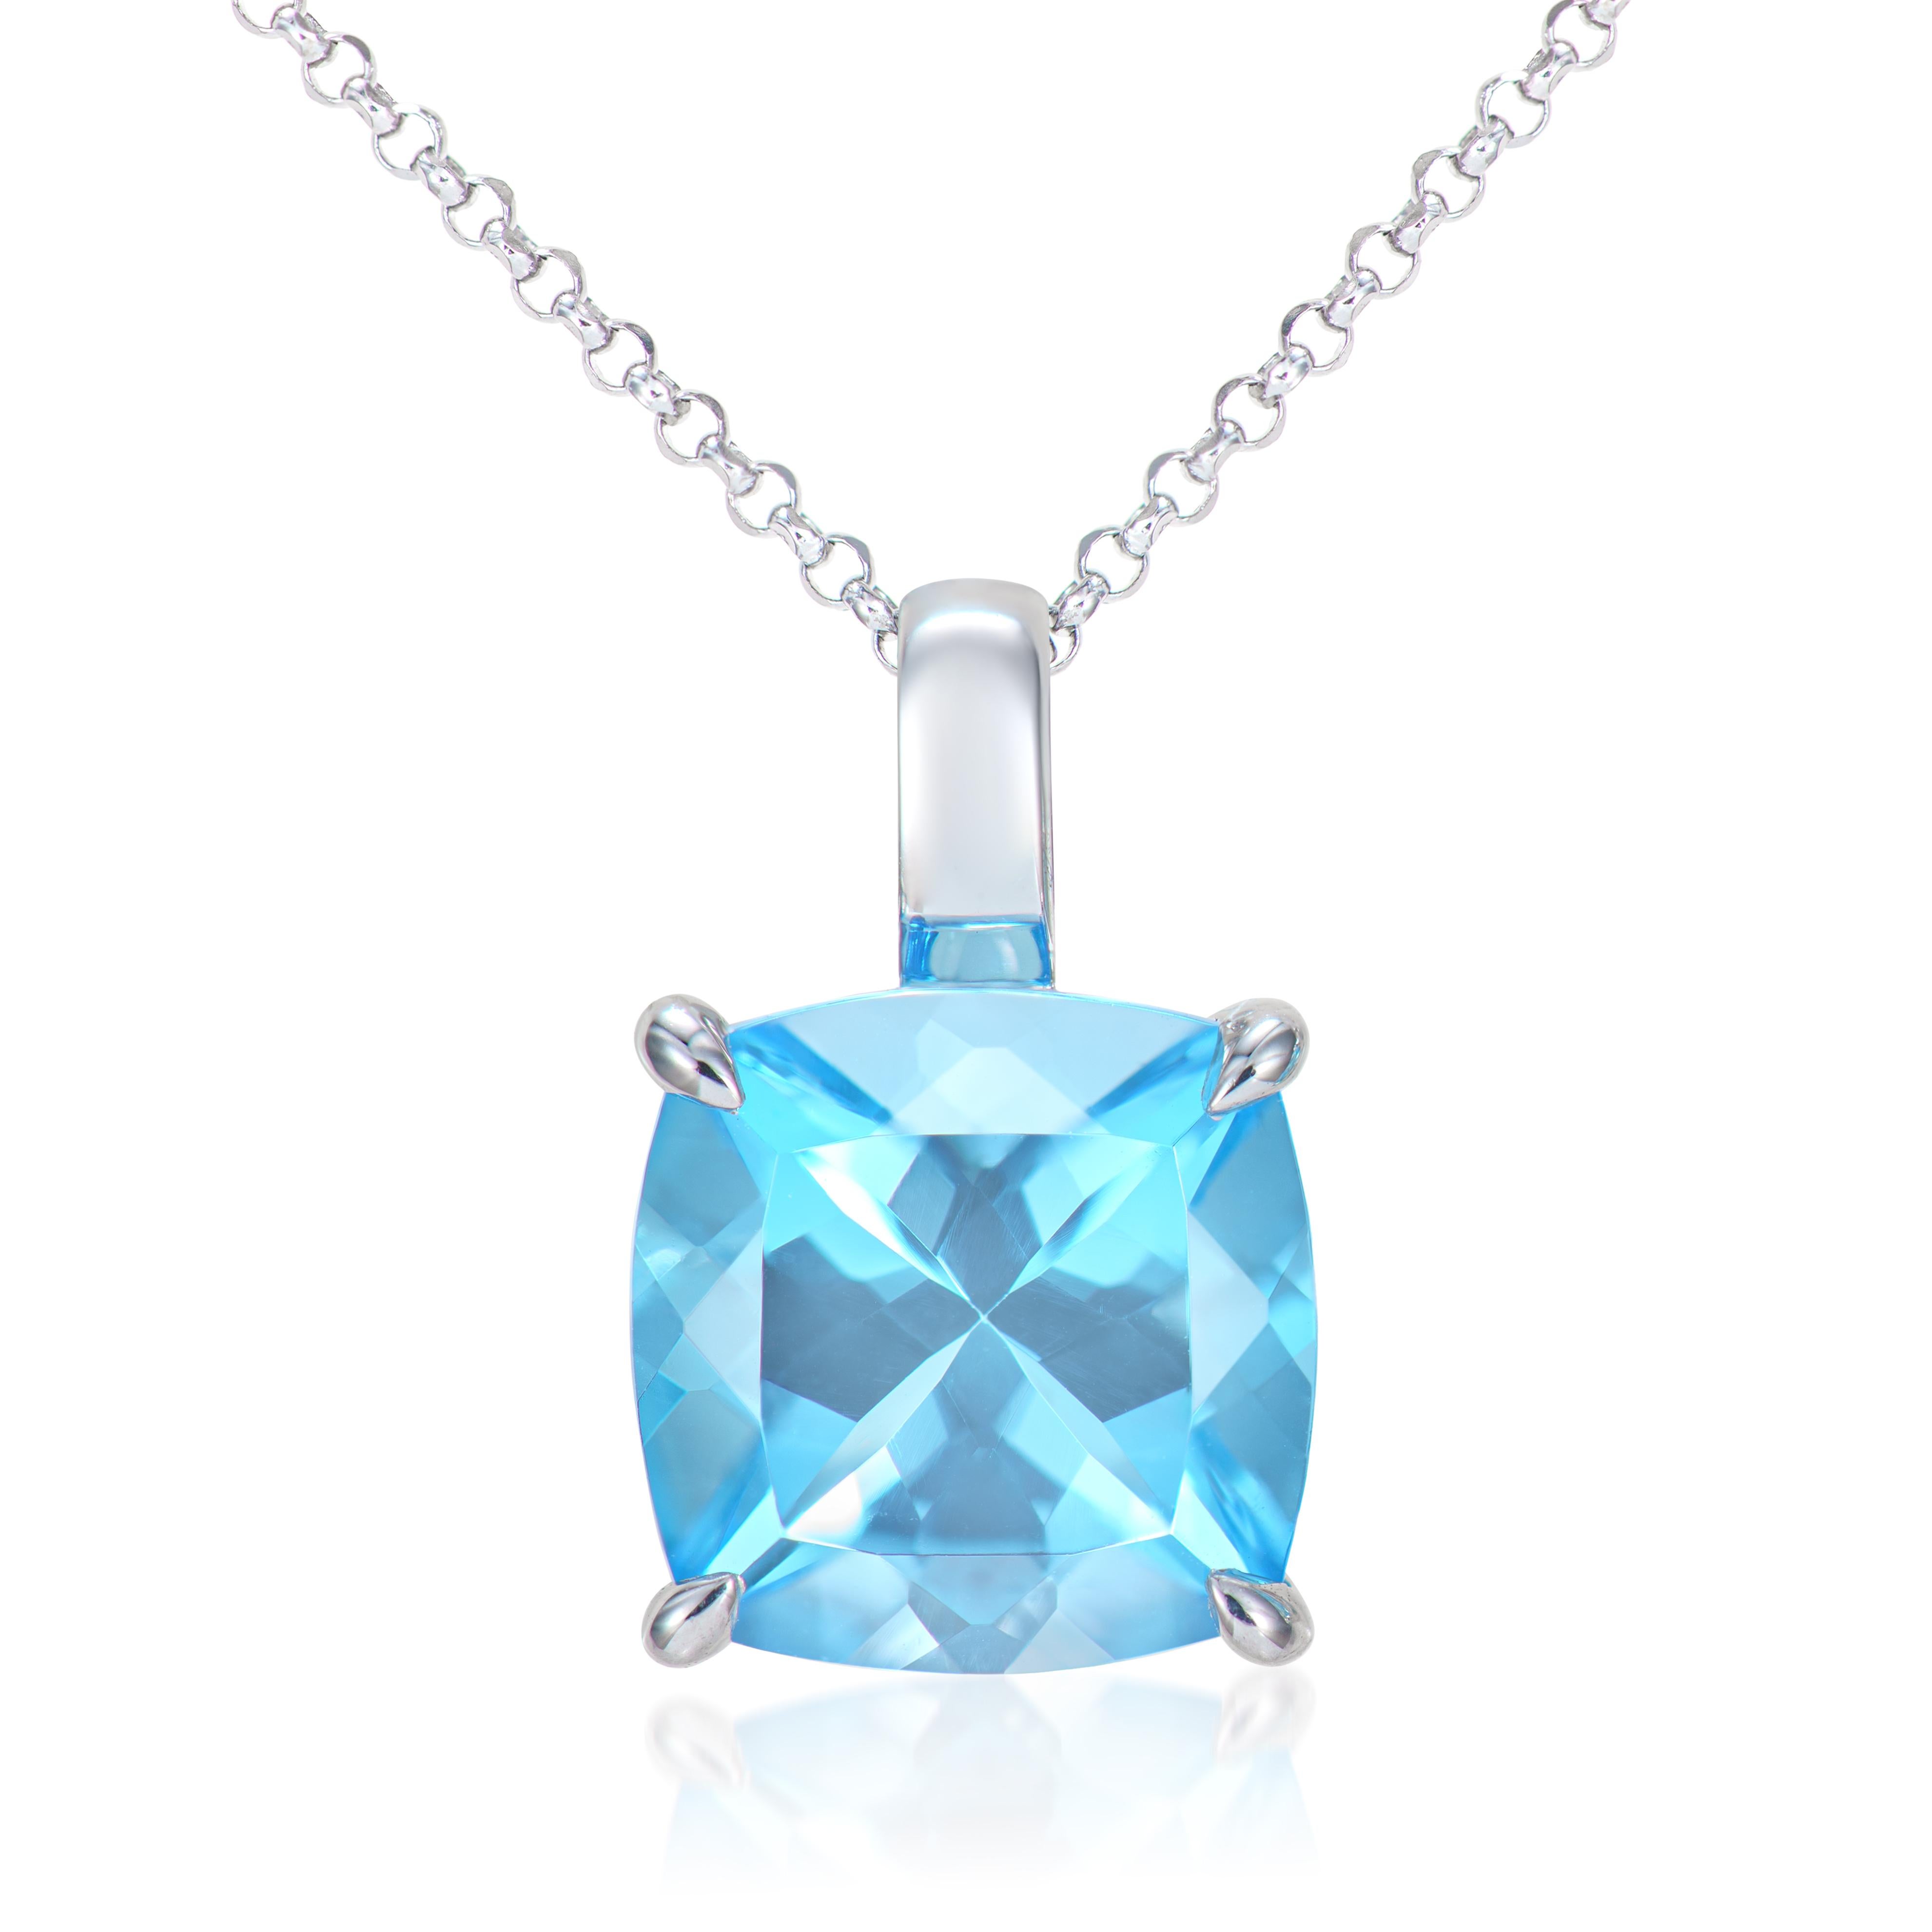 Presented A lovely collection of gems, including Amethyst, Sky Blue Topaz, and Swiss Blue Topaz is perfect for people who value quality and want to wear it to any occasion or celebration. The white gold swiss blue topaz pendant offer a classic yet